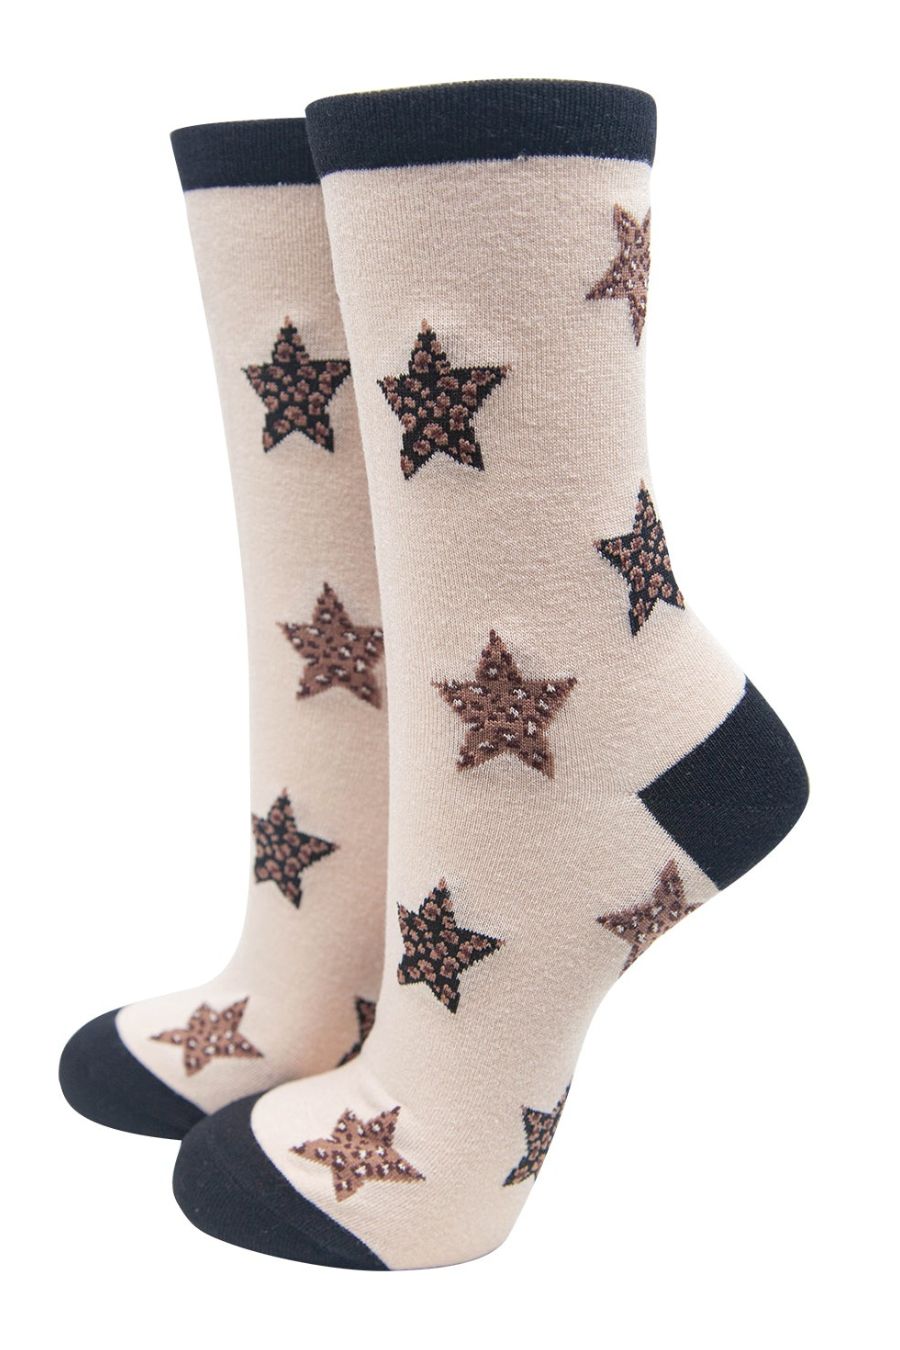 cream ankle socks with brown and black animal print stars all over